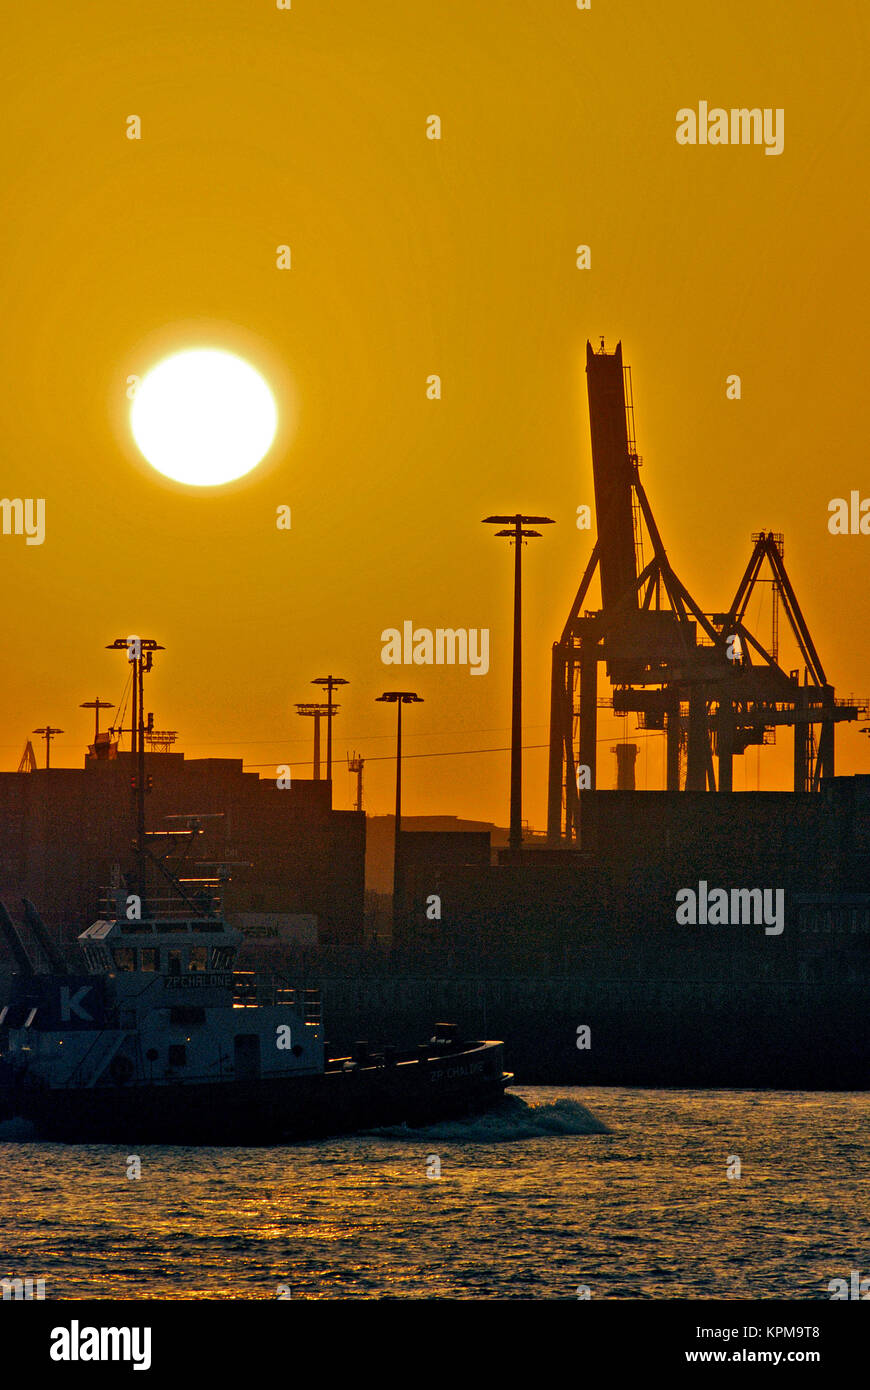 Hamburg, one of the most beautiful and most popular tourist destinations in the world. Stock Photo